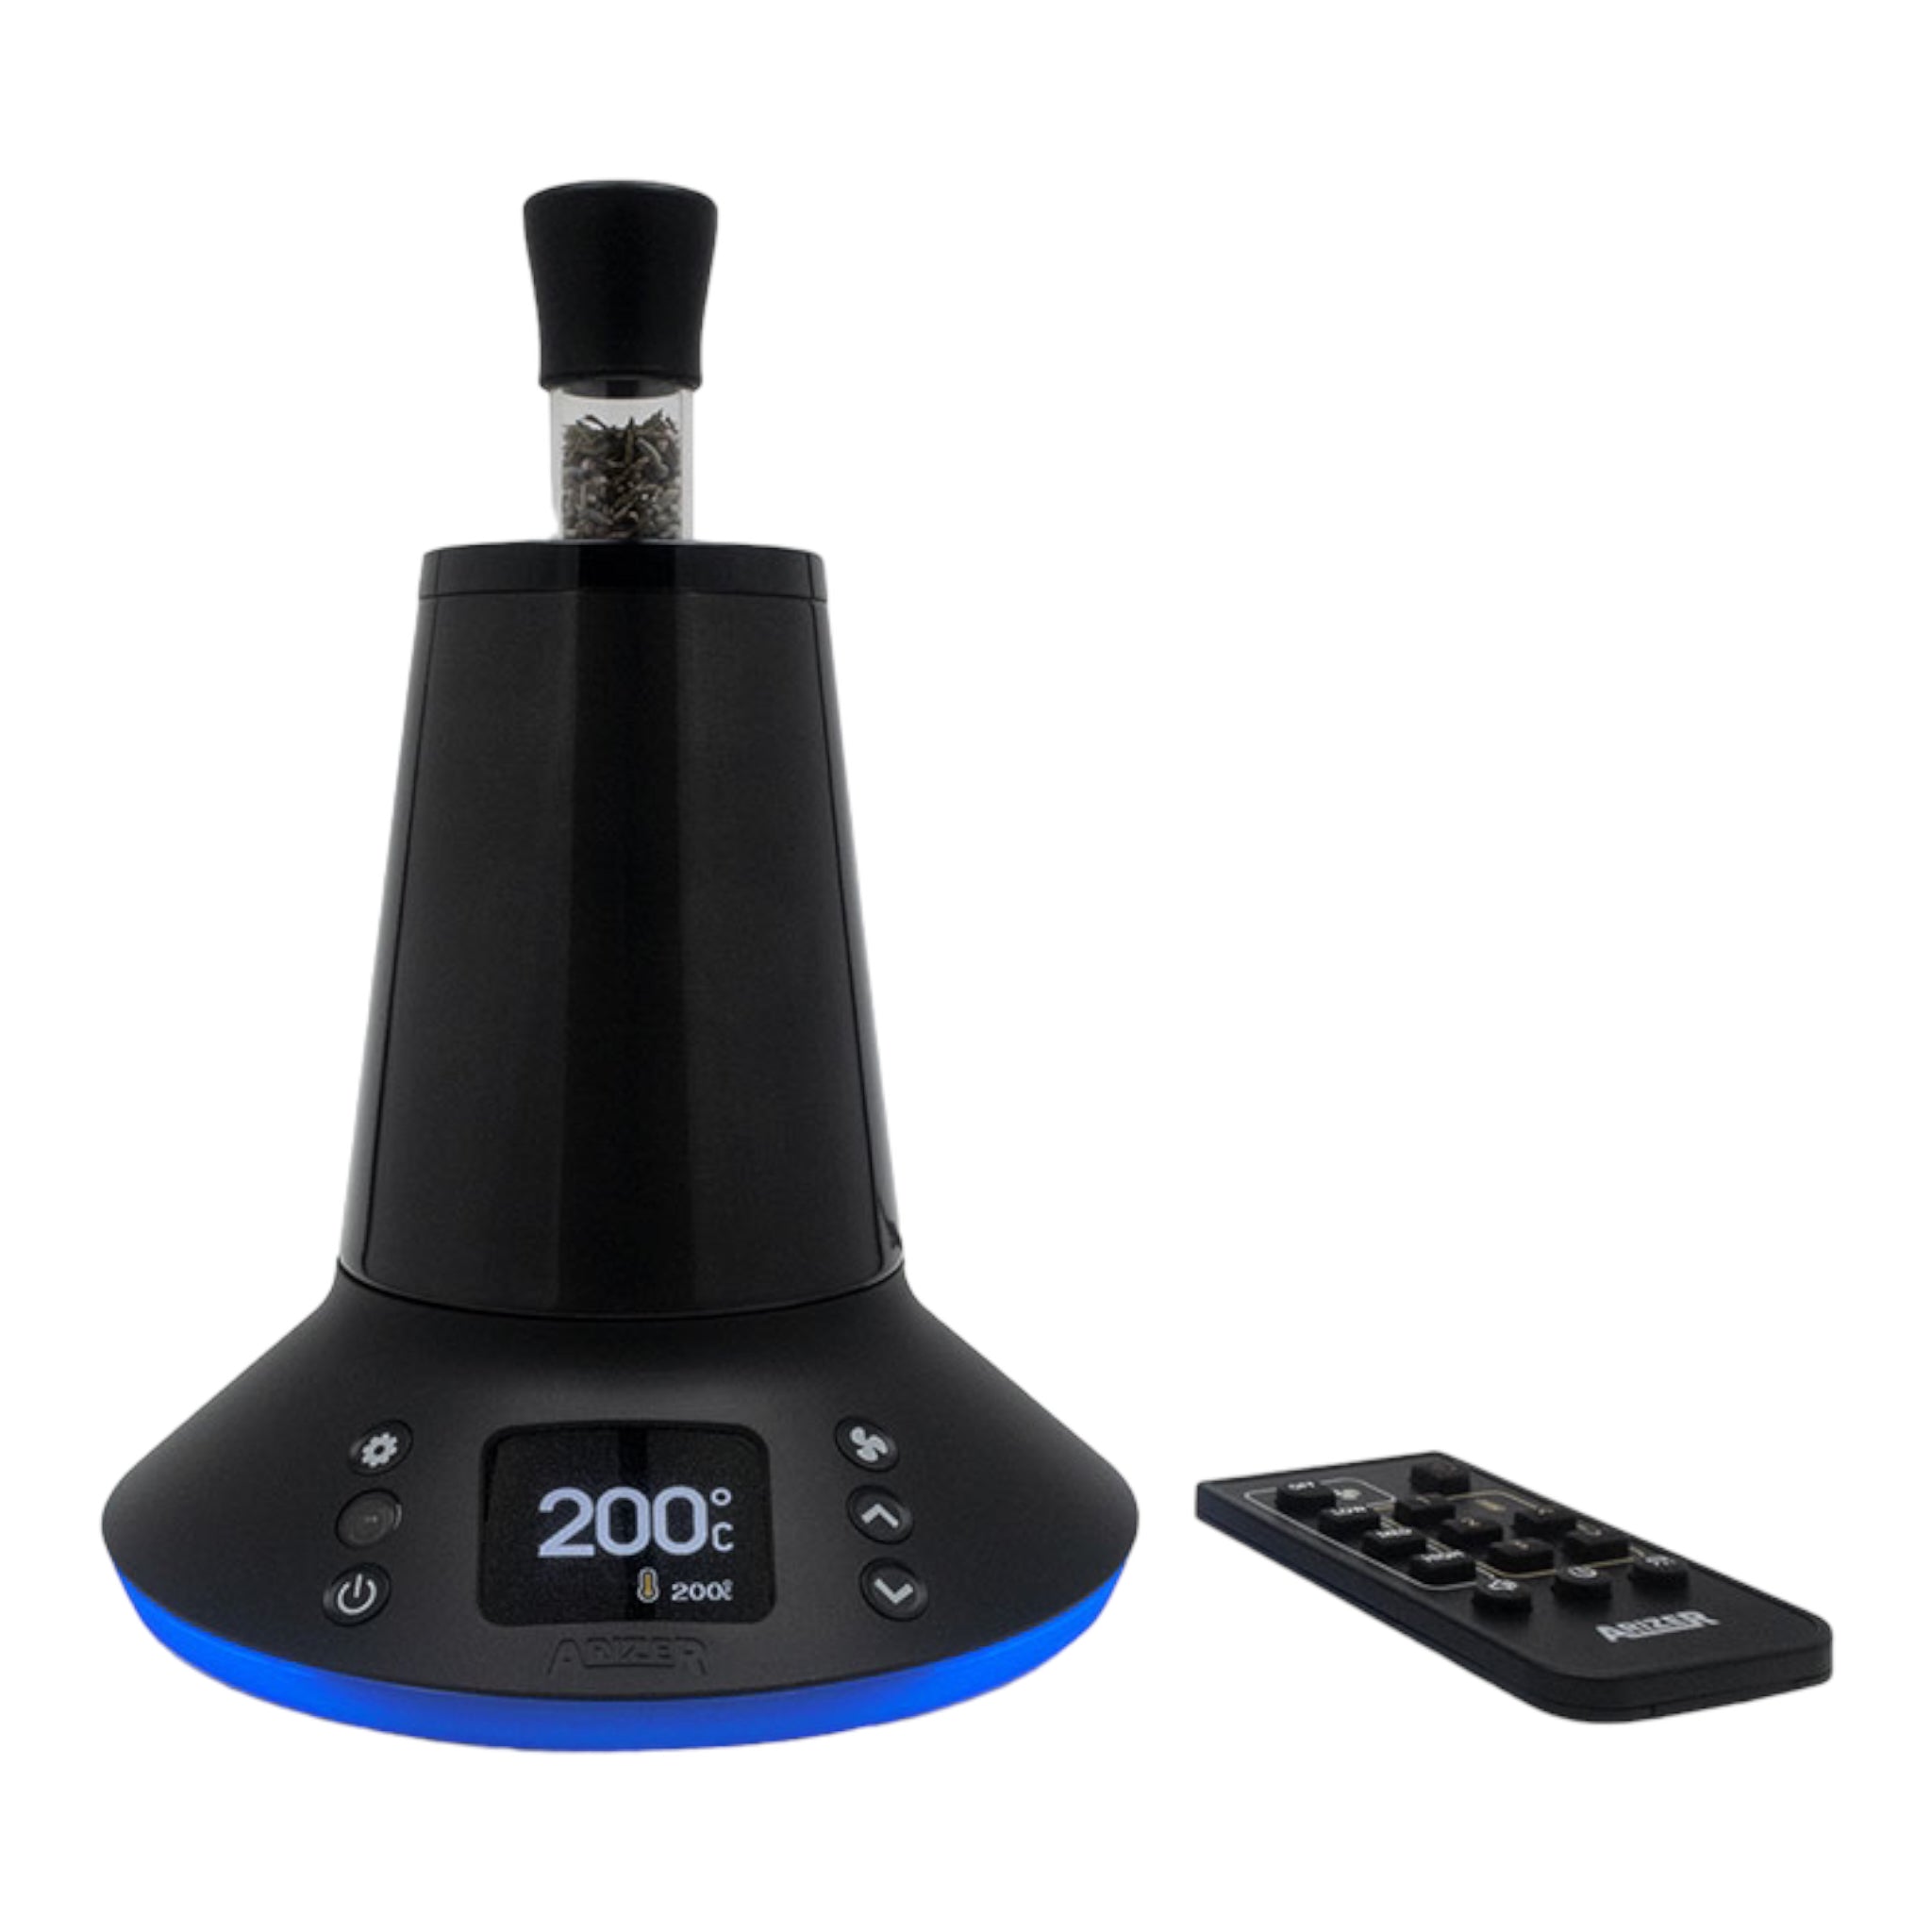 Arizer Extreme Q Version 2 Table Top Dry Herb Vaporizer